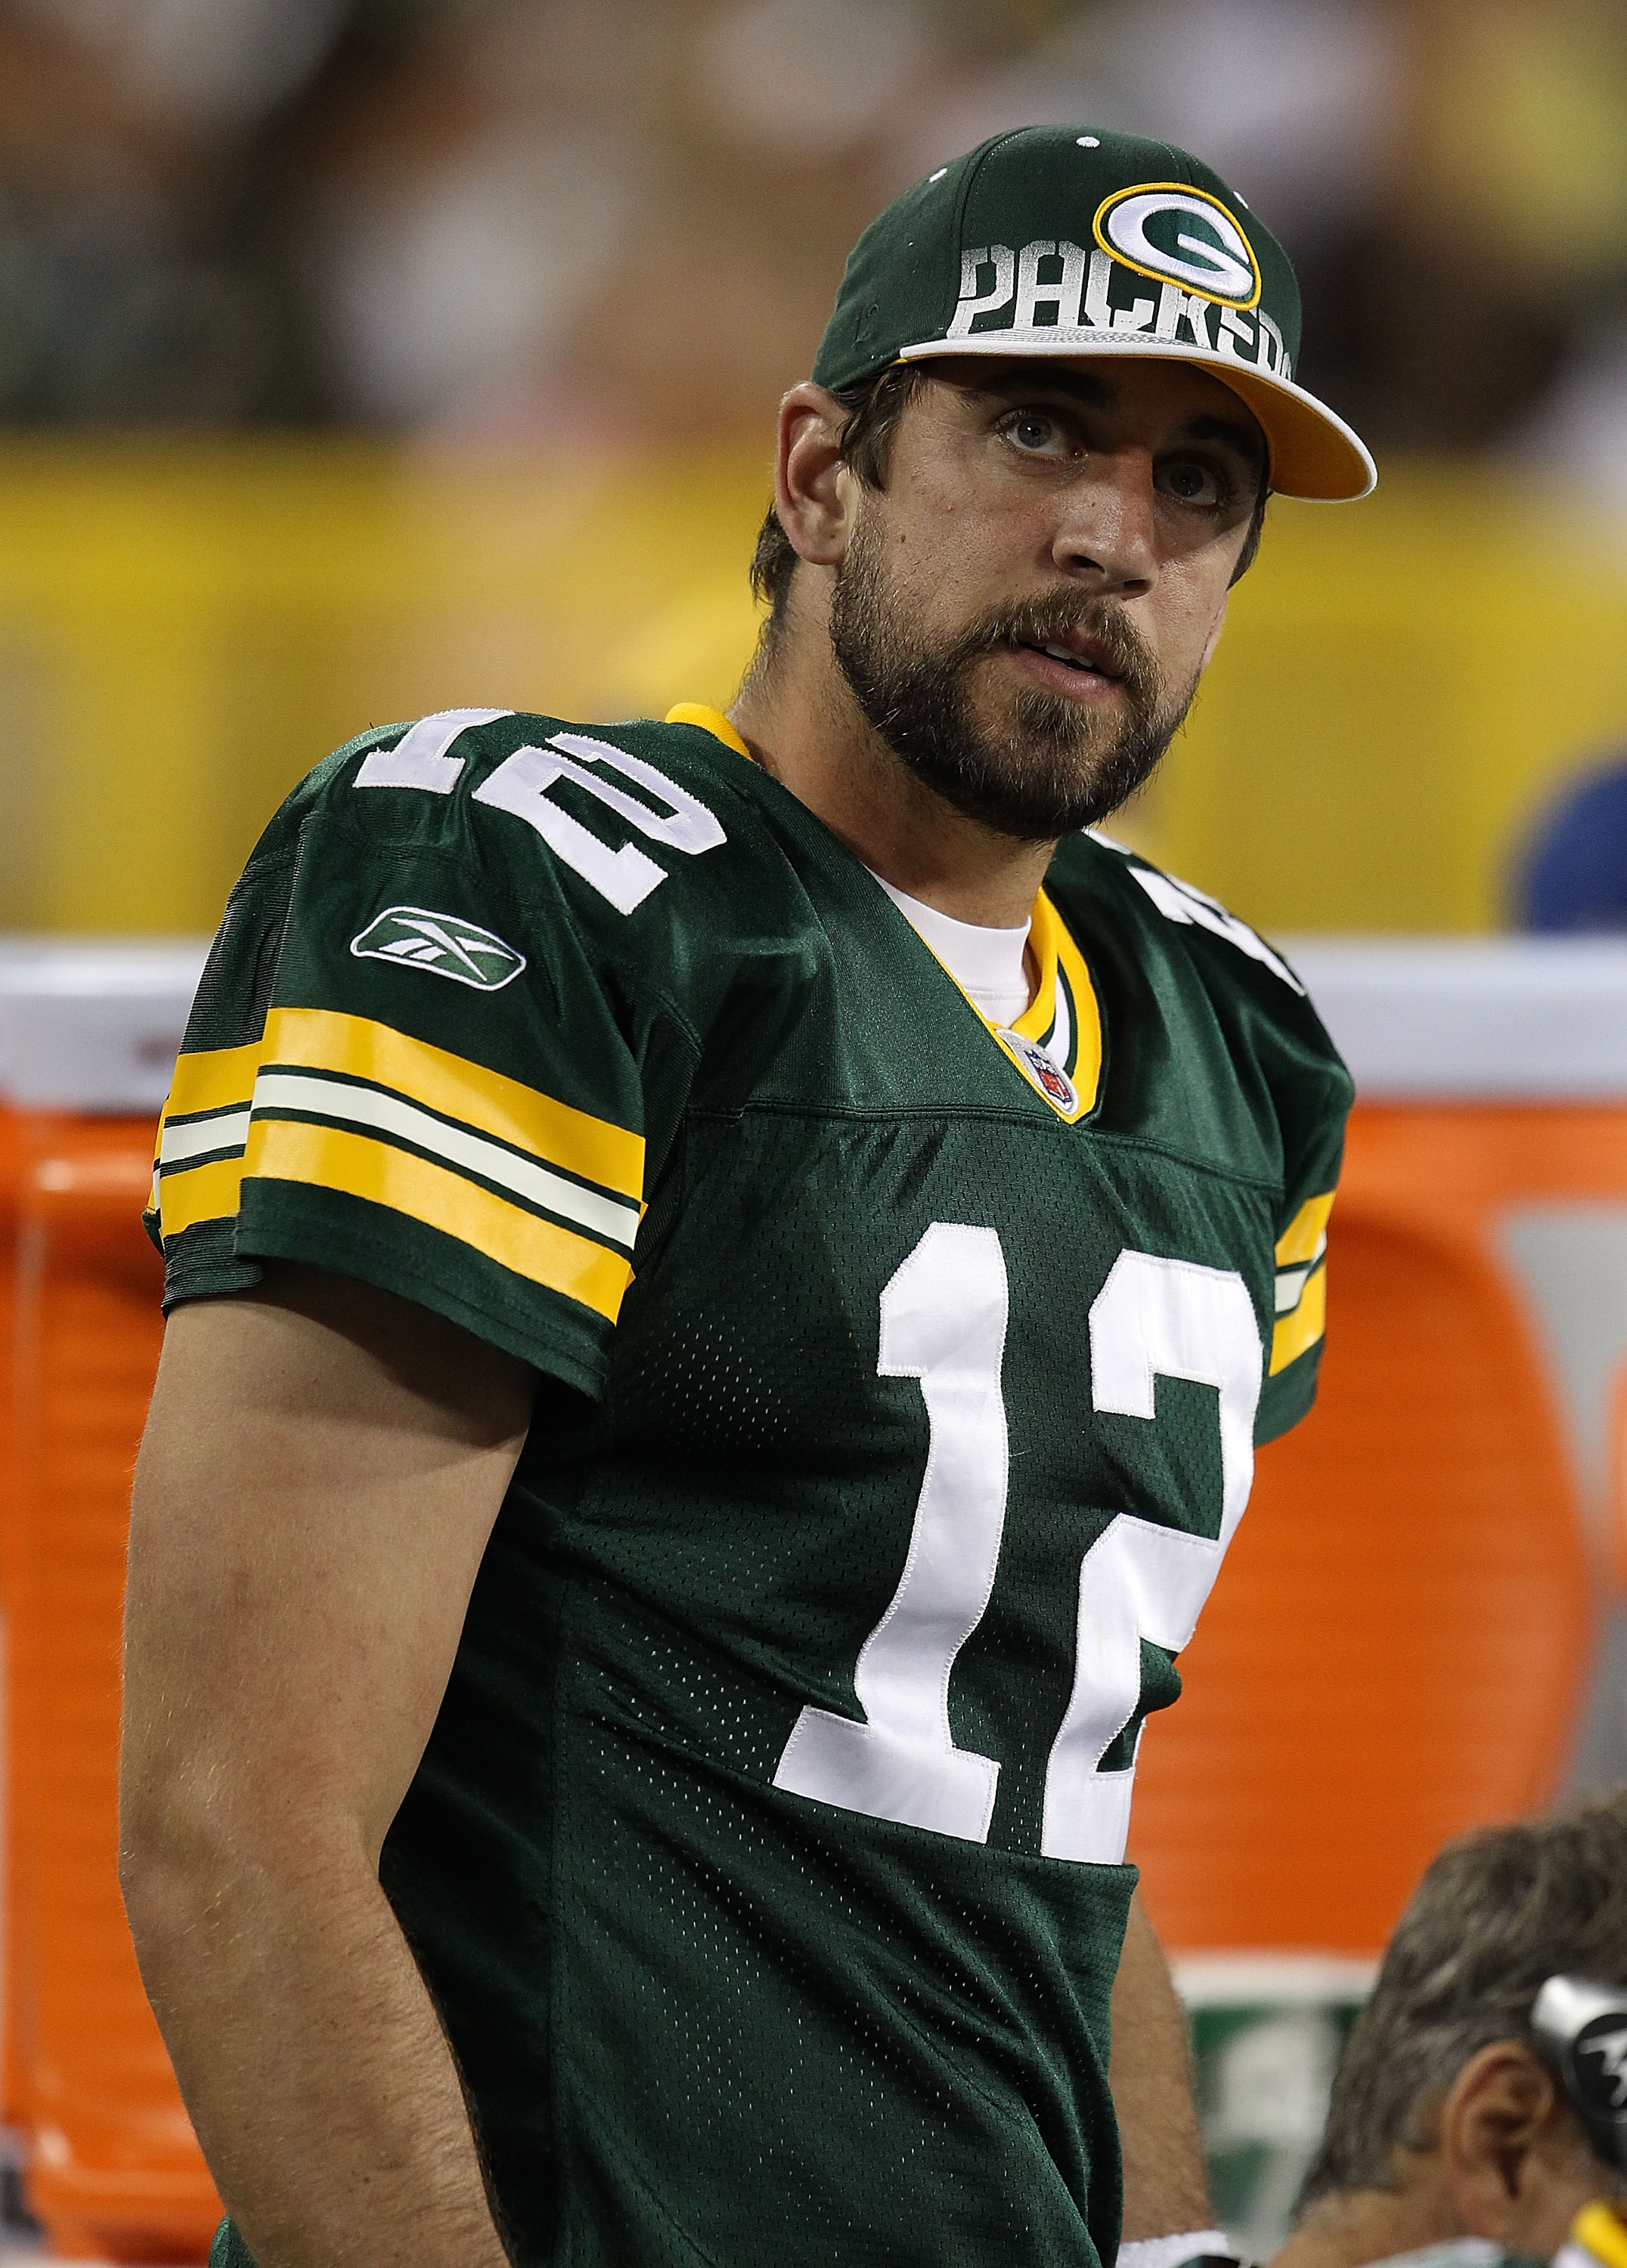 GREEN BAY, WI - AUGUST 26: Aaron Rodgers #12 of the Green Bay Packers watches as his teammates take on the Indianapolis Colts during a preseason game at Lambeau Field on August 26, 2010 in Green Bay, Wisconsin. The Packers defeated the Colts 59-24. (Photo